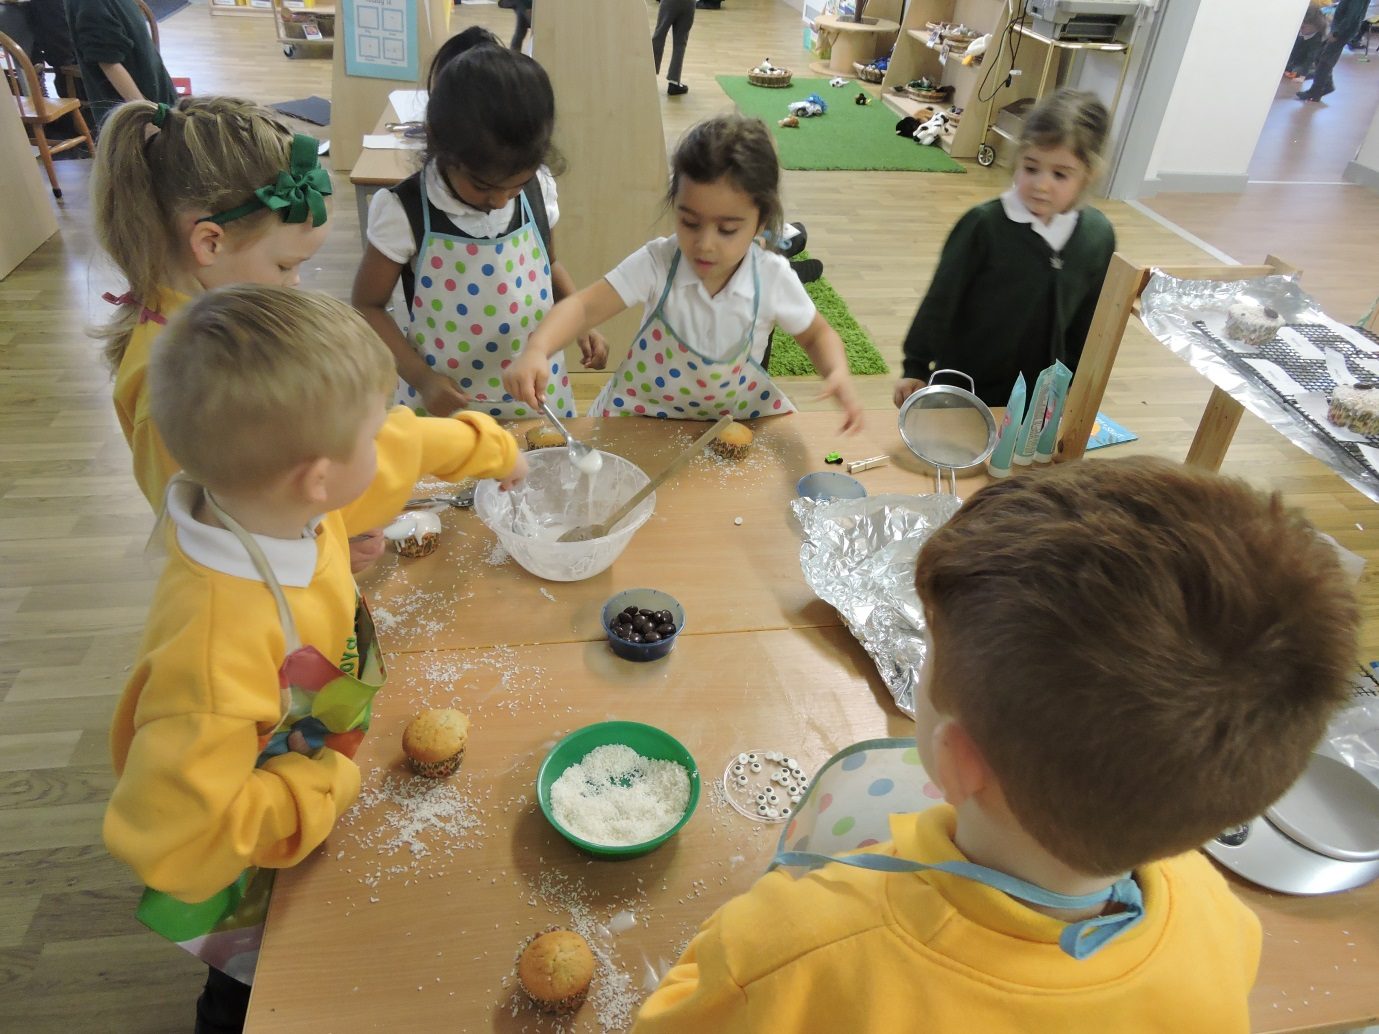 Reception Great Christmas Bake Off!